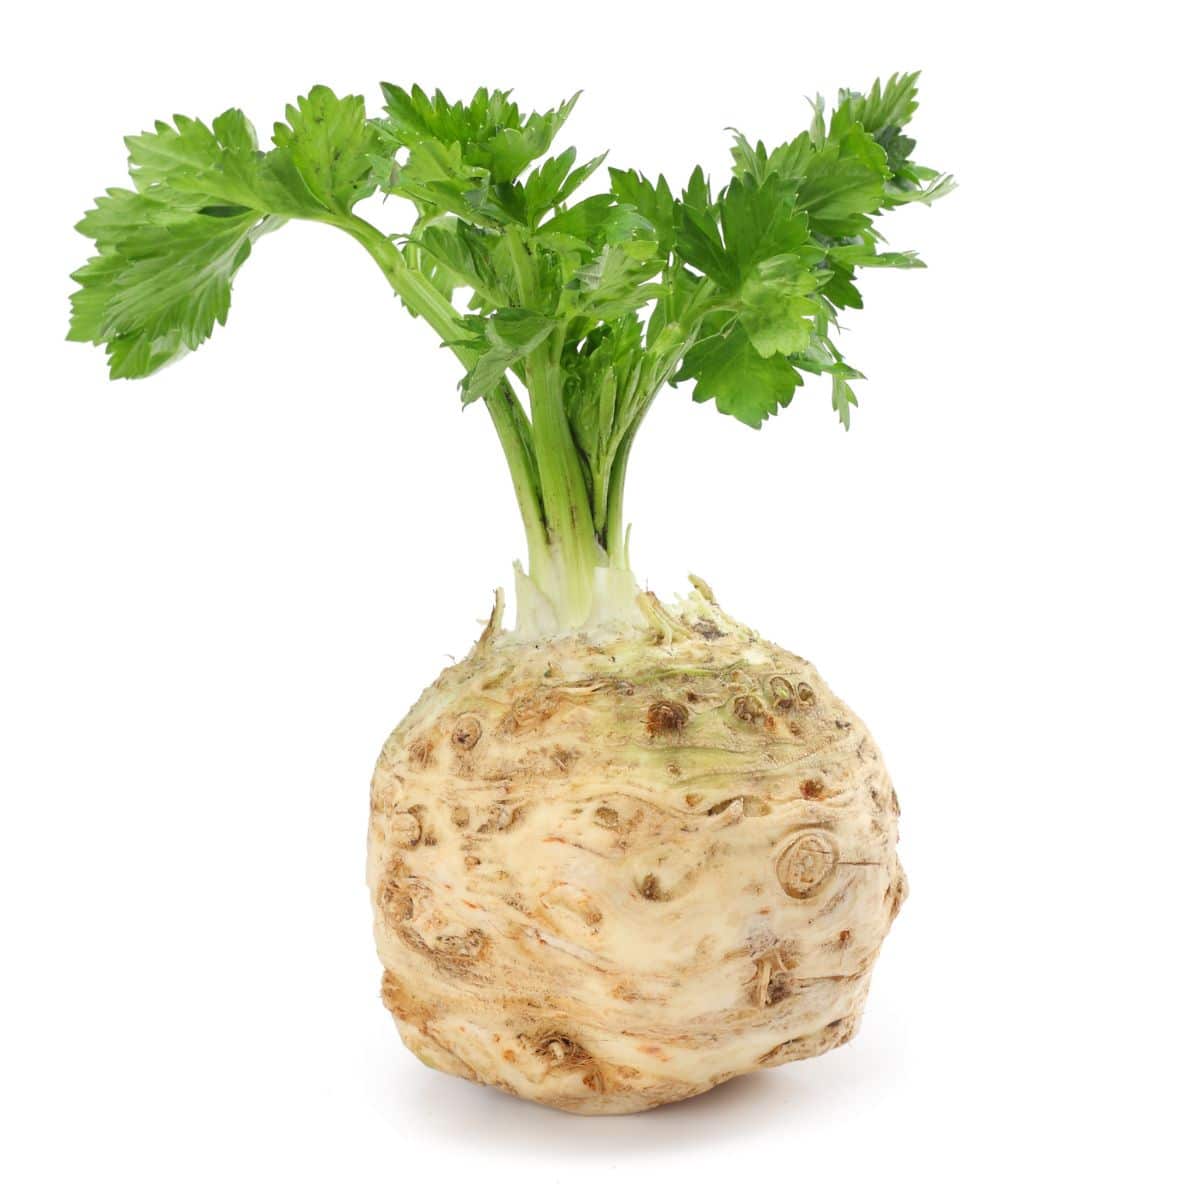 Celery root on an isolated white background.